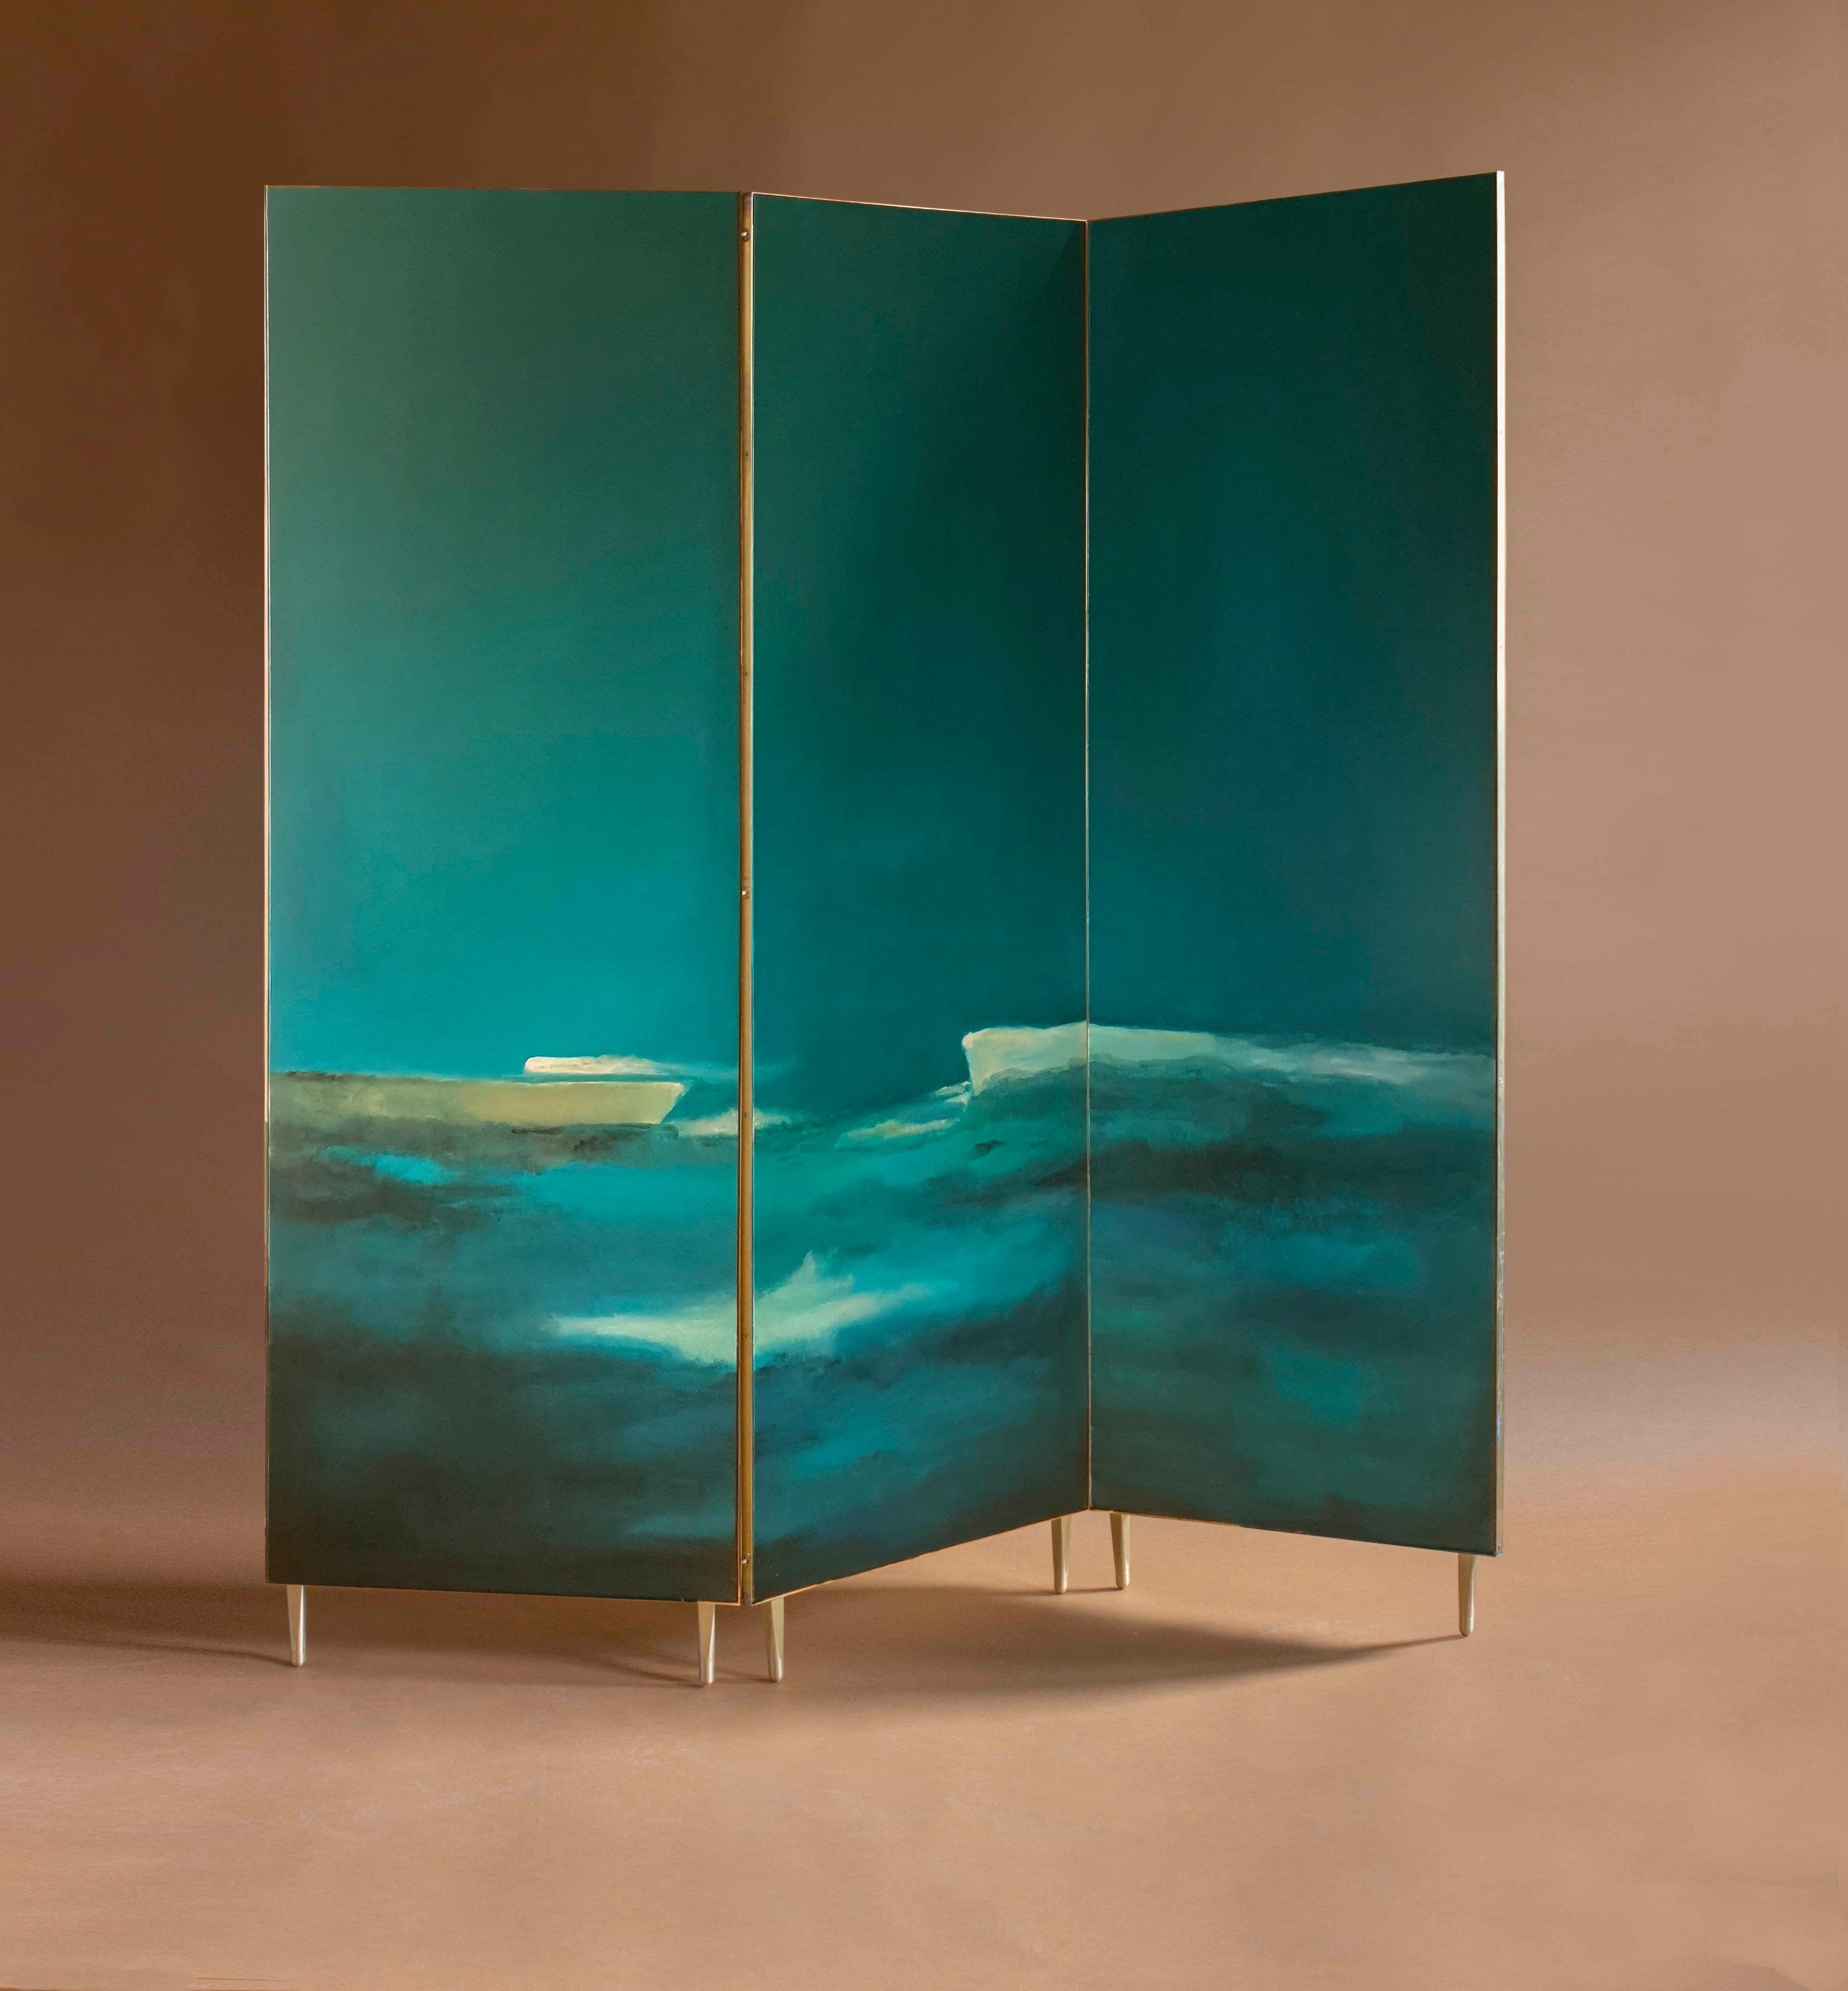 Hand Painted Screen, Jan Garncarek and Ewelina Makosa
Each screen is unique and signed by Jan Garncarek and Ewelina Makosa
Full brass frame. Hand painted on both sides of the screen.
Dimensions: 180 x 5 x 200 cm
Weight:20 kg

Hand painted cloth in a